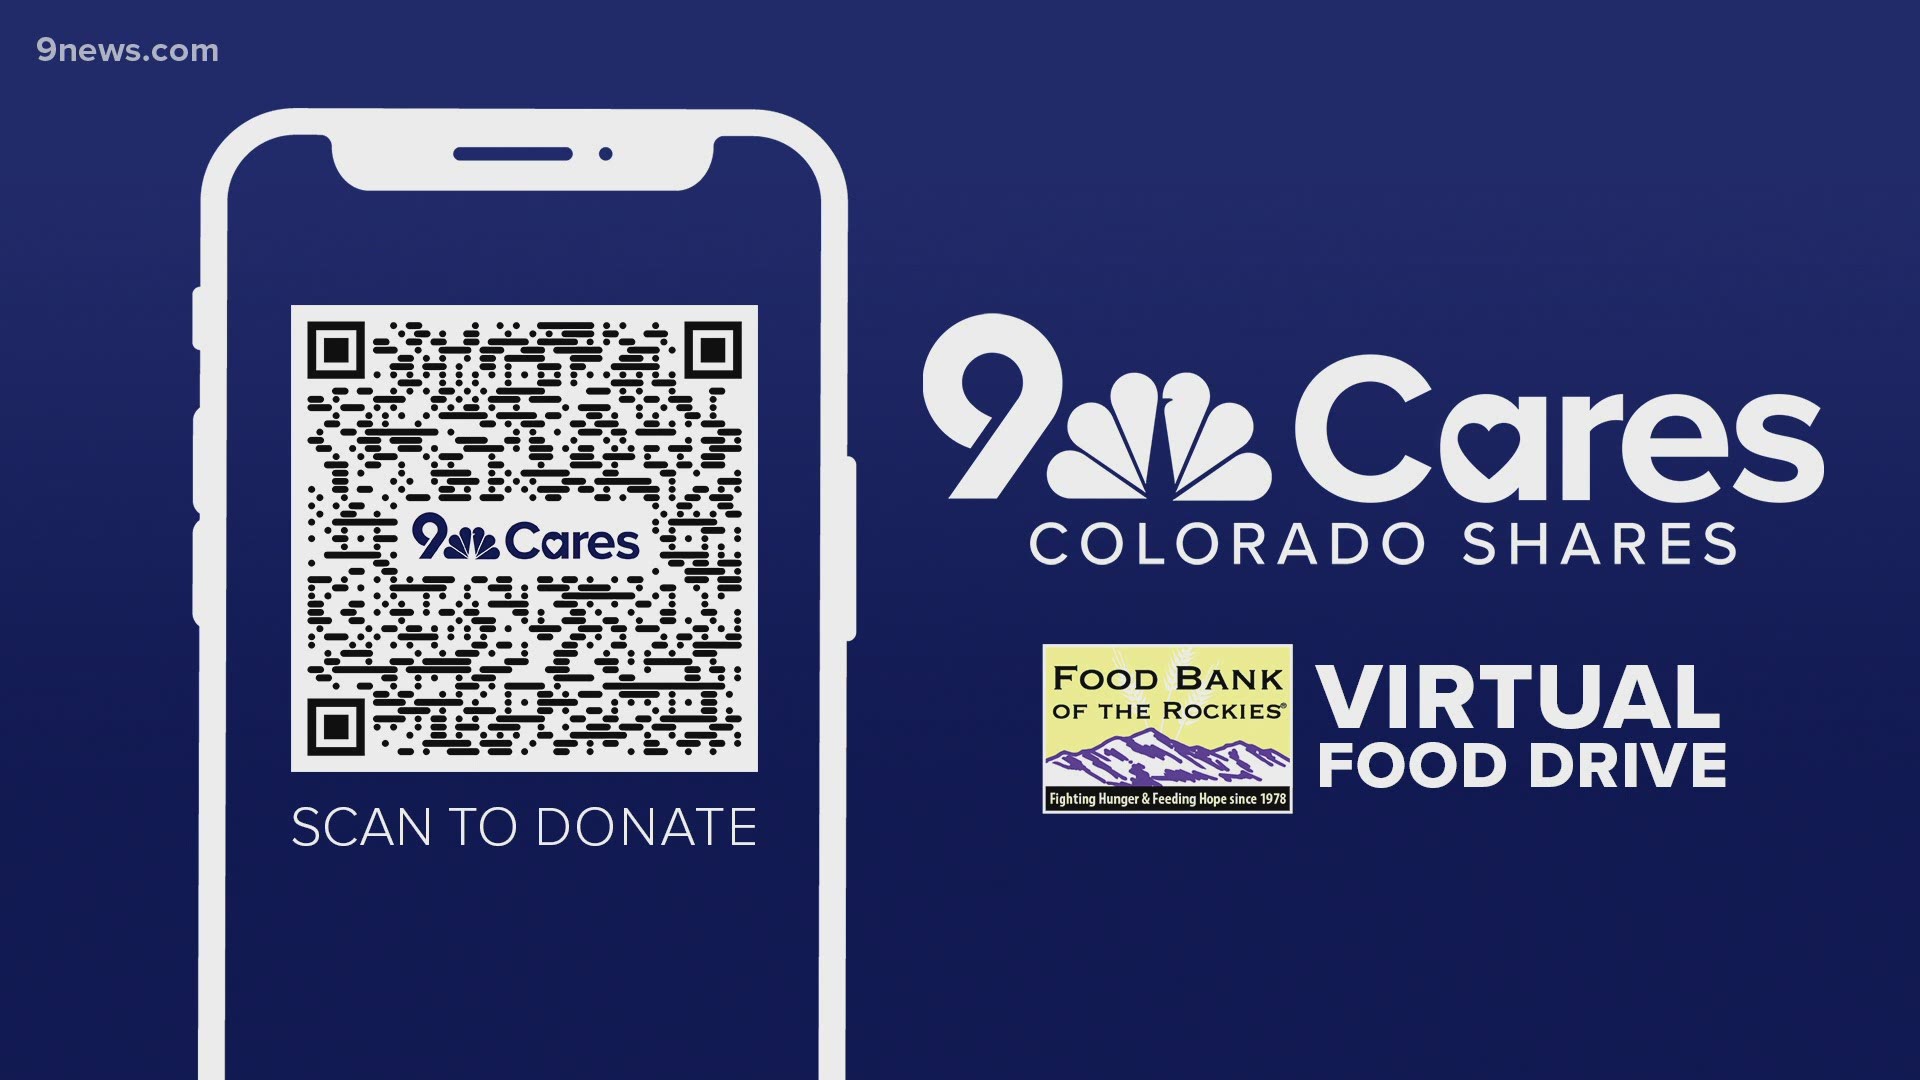 The 38th annual 9Cares Colorado Shares online giving campaign will benefit Food Bank of the Rockies.